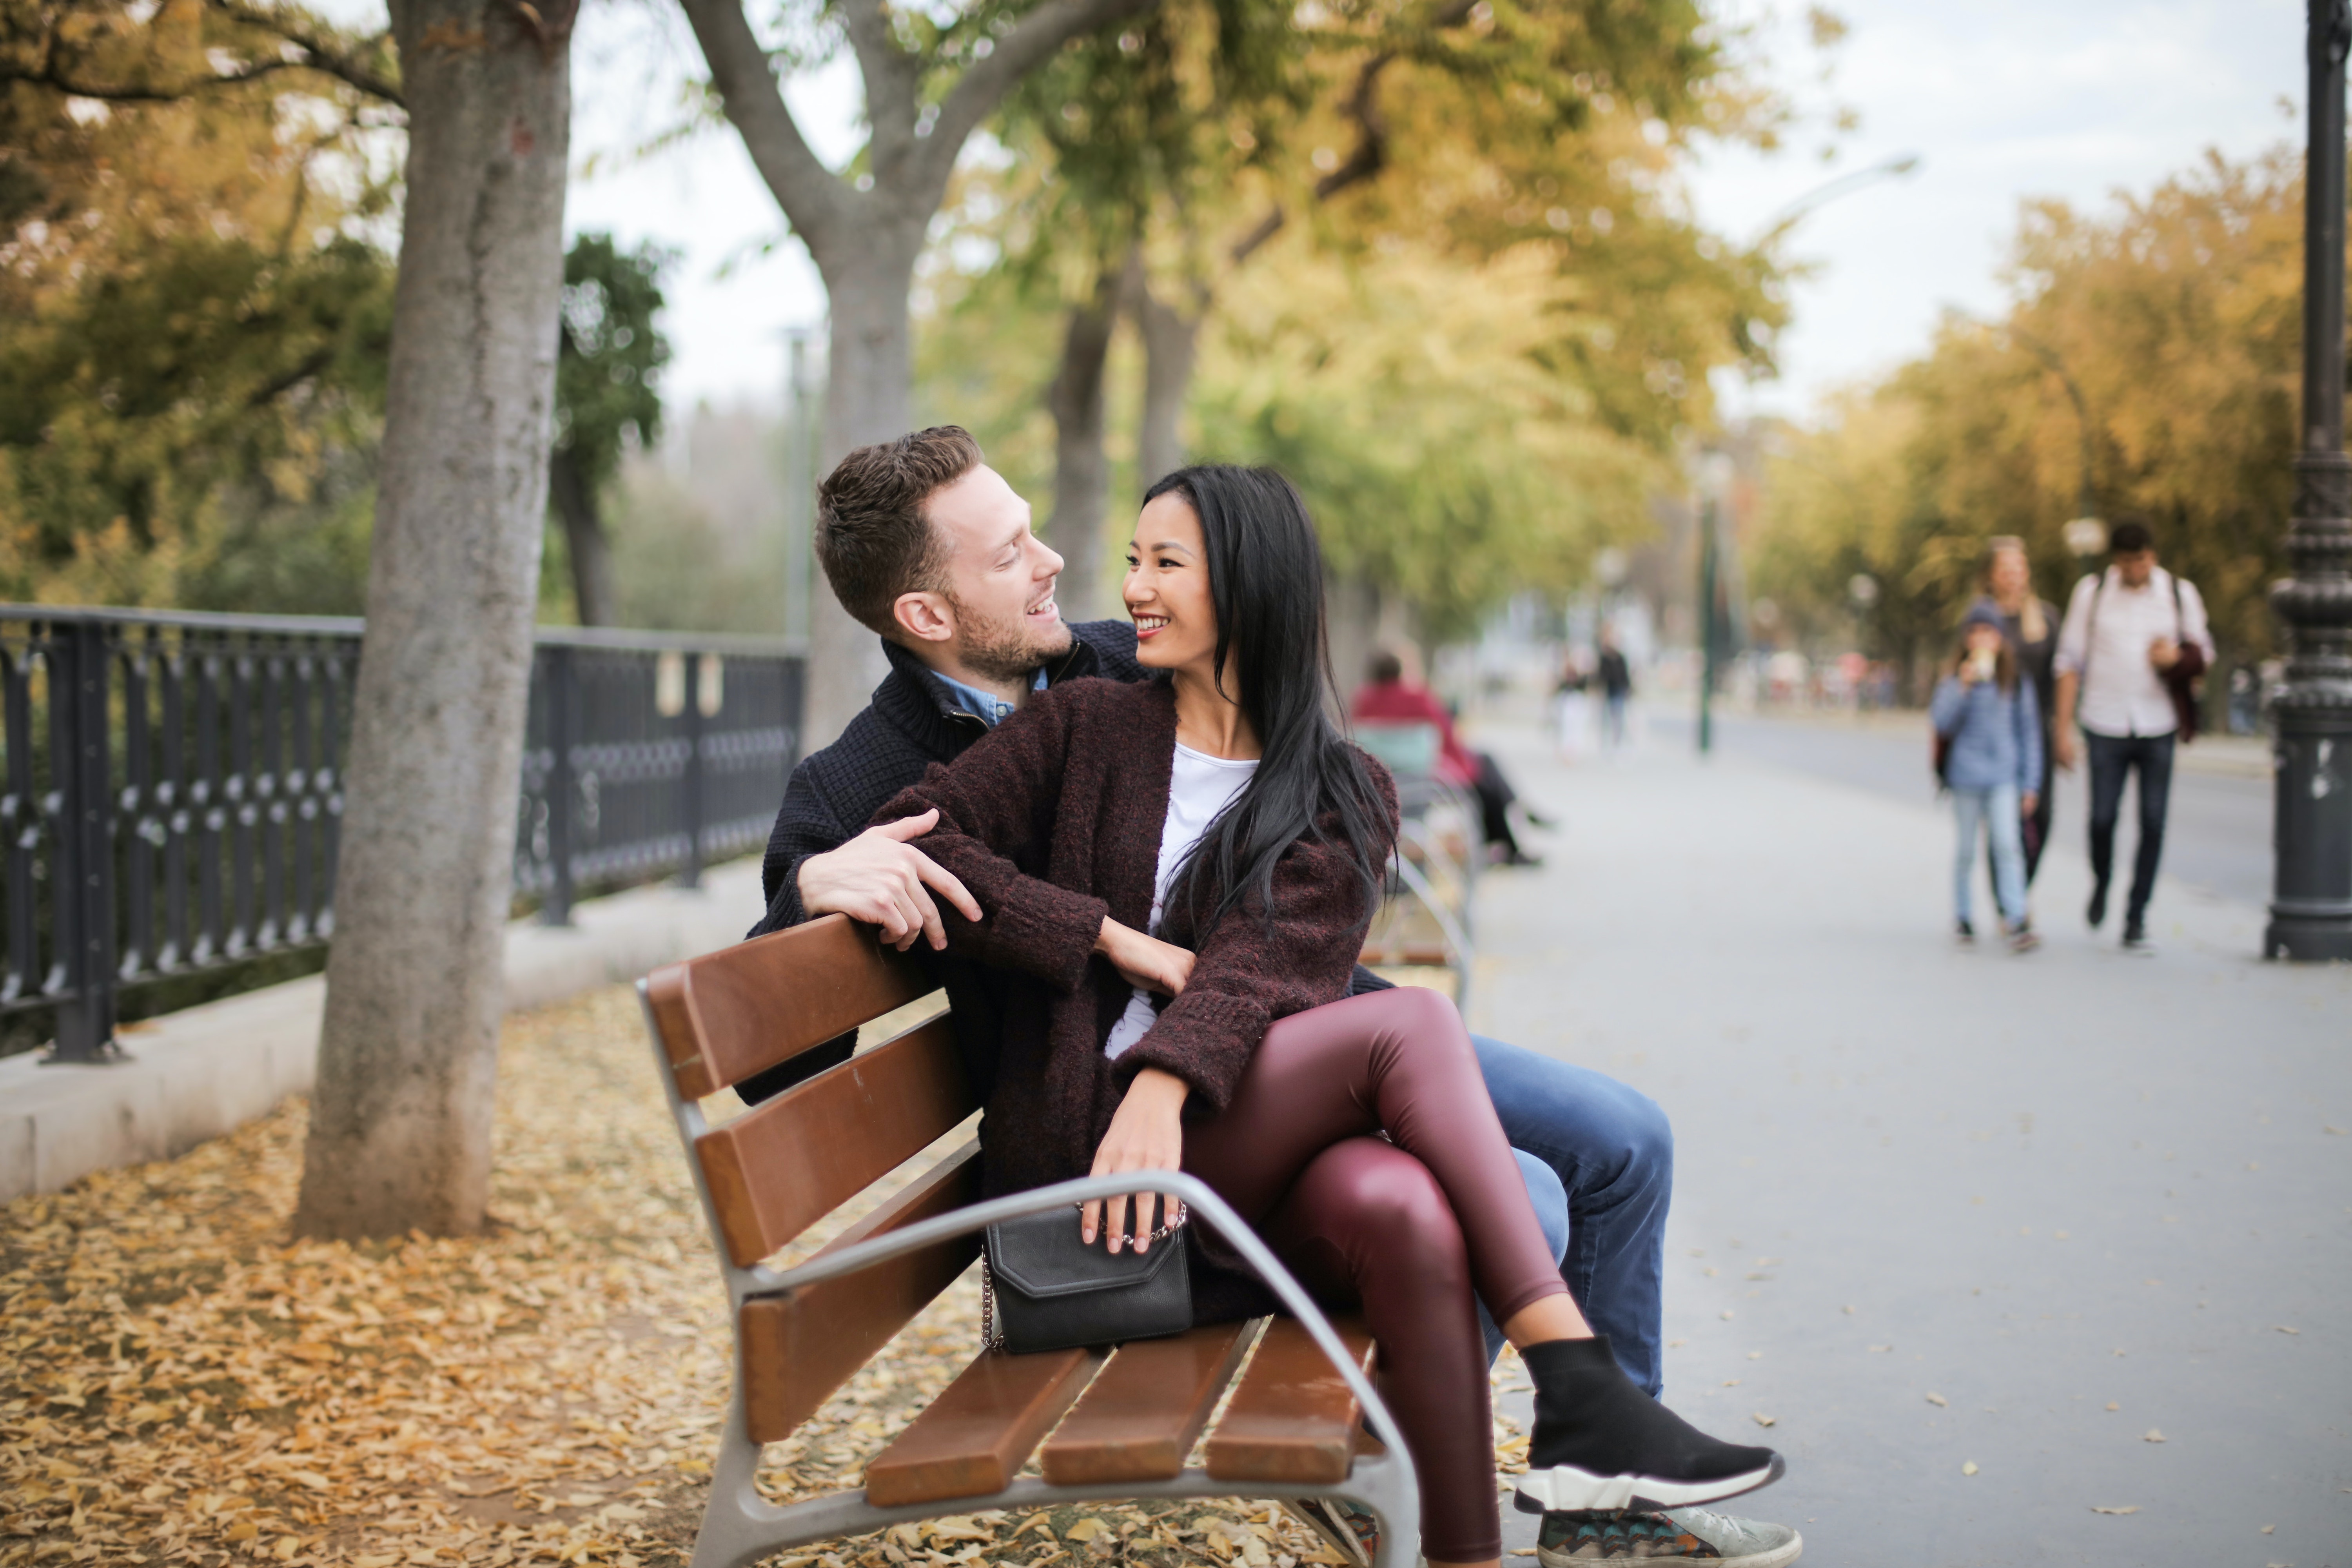 Couple sitting on wooden bench. | Source: Pexels